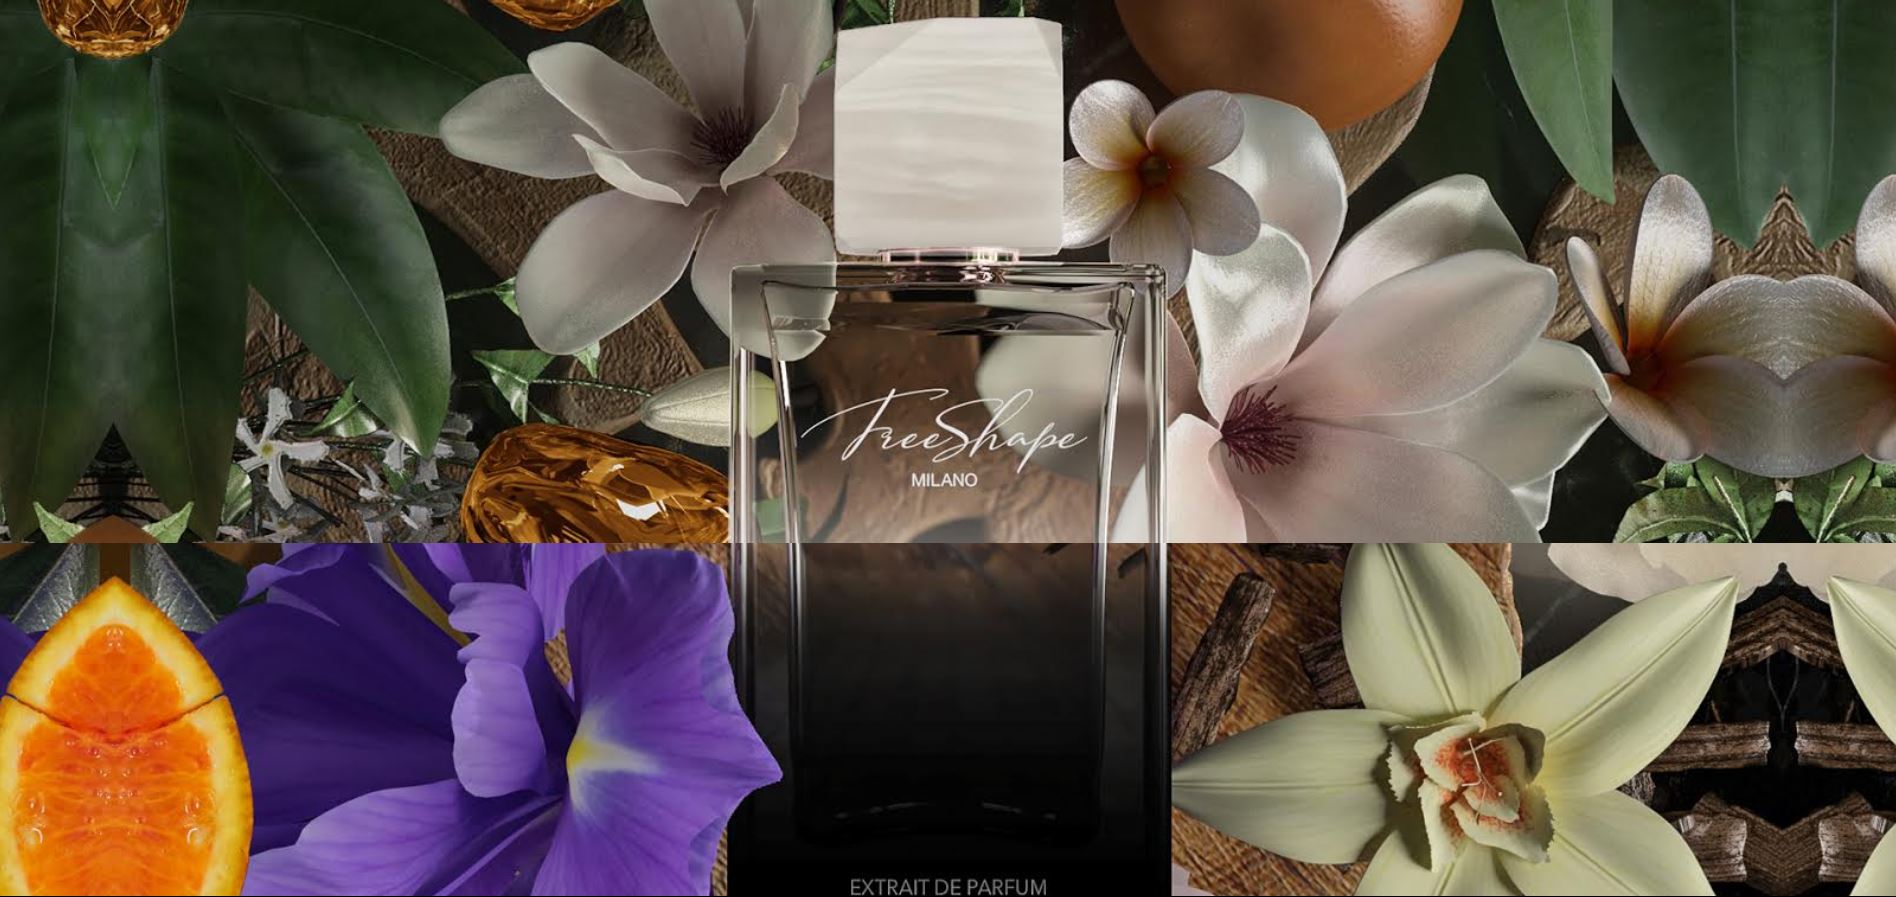 Freeshape website products screenshot, exclusive perfumes selling site